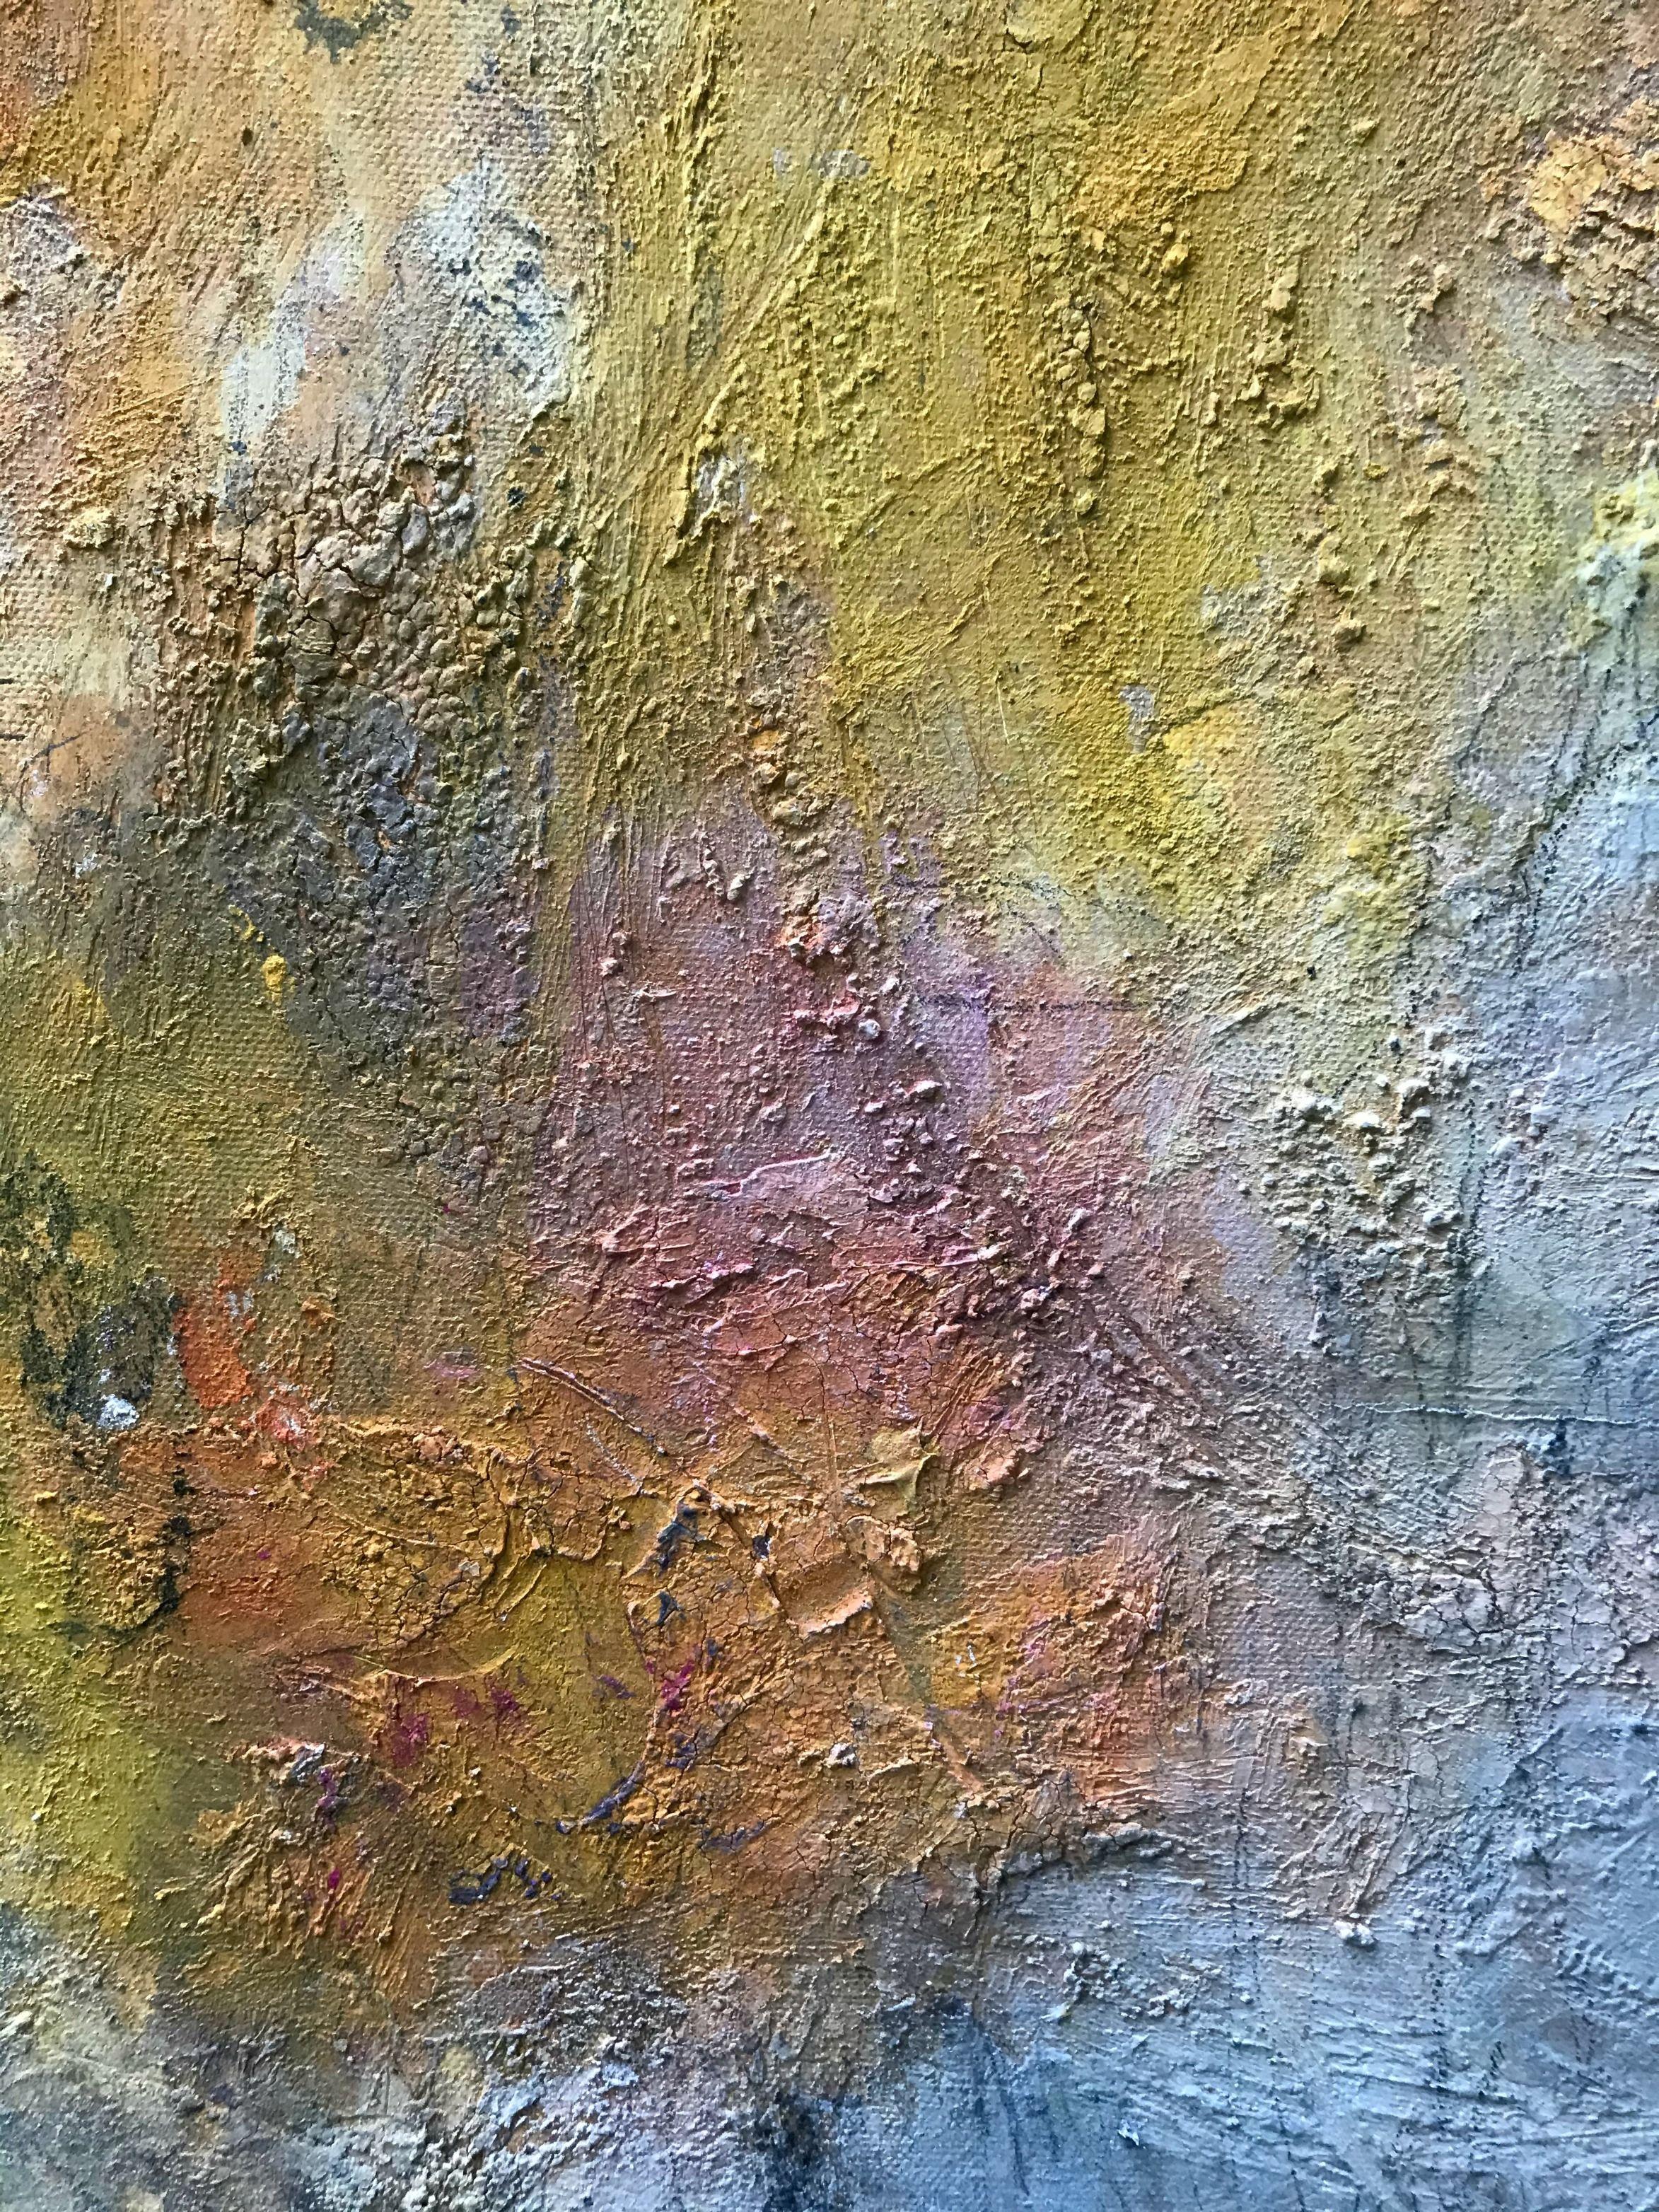 This painting was inspired by mood rather than imagery. I experimented with textures and structure in this work. Many layers of natural material including marble dust and pigments was built up with washes of paint running into the crevices and